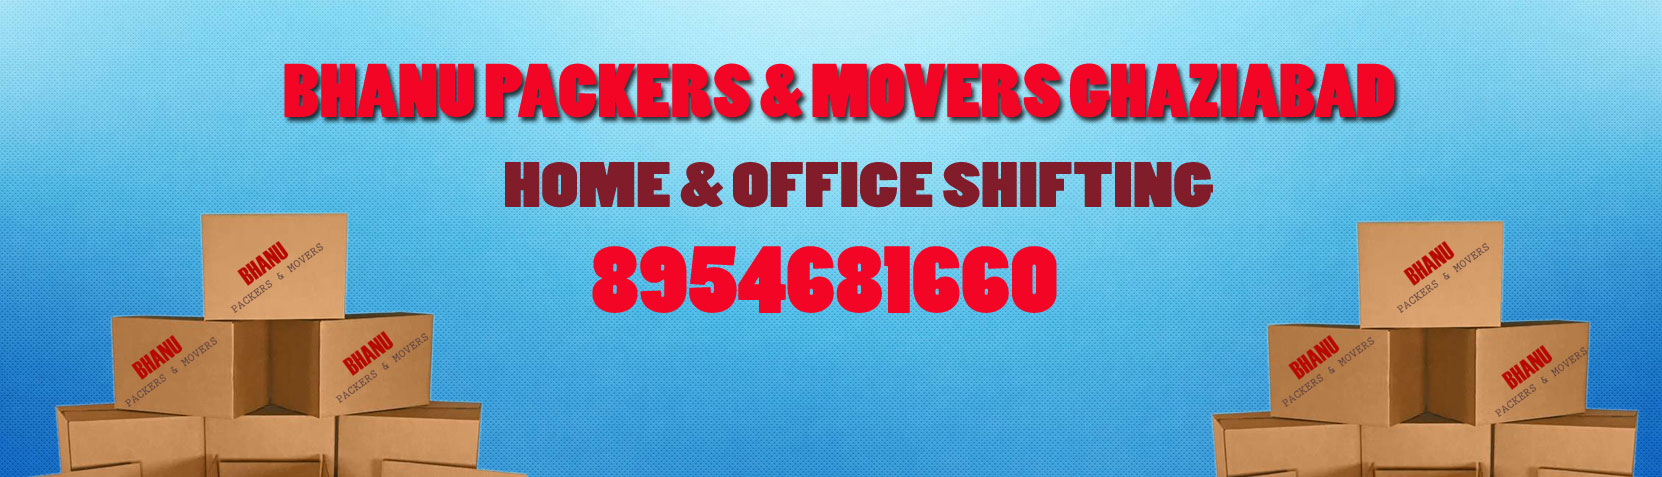 Bhanu Packers and Movers Ghaziabad